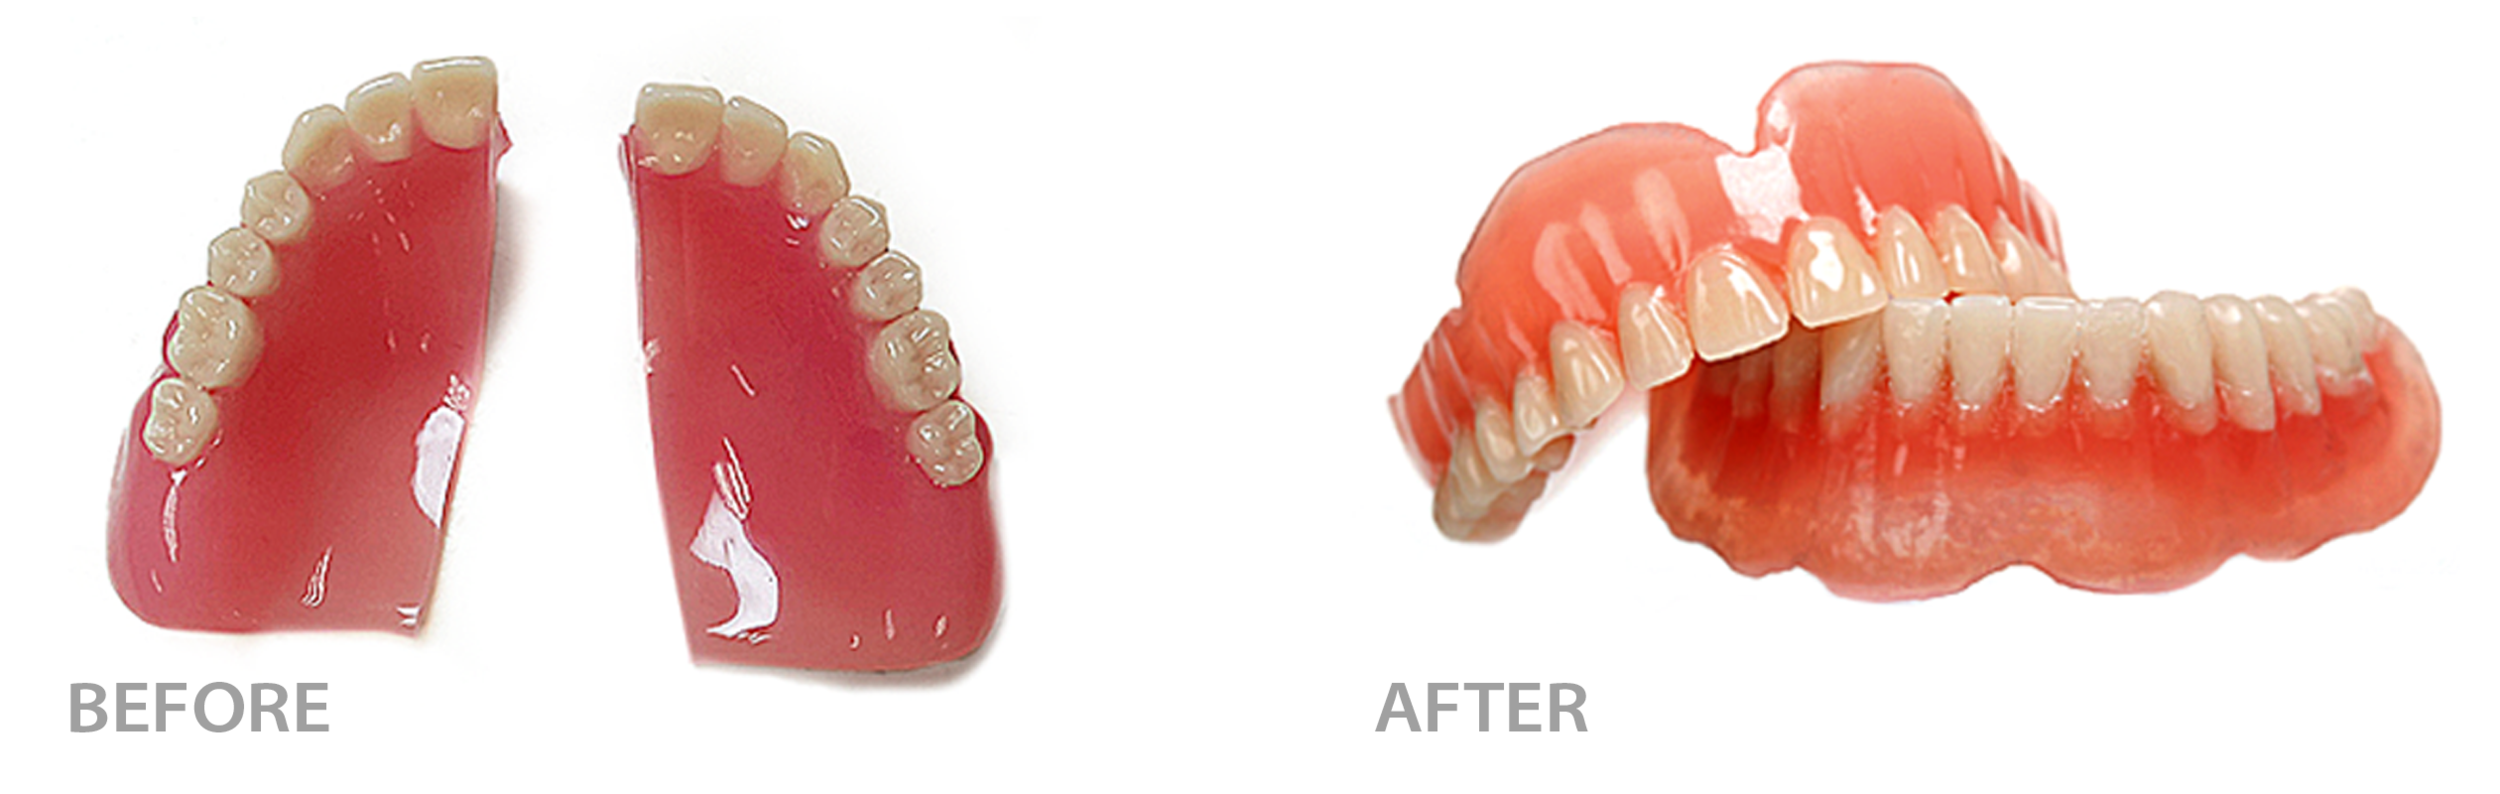  before image of denture set from above, flossy and broken in half beside after image of same dentures now fixed and in one piece  